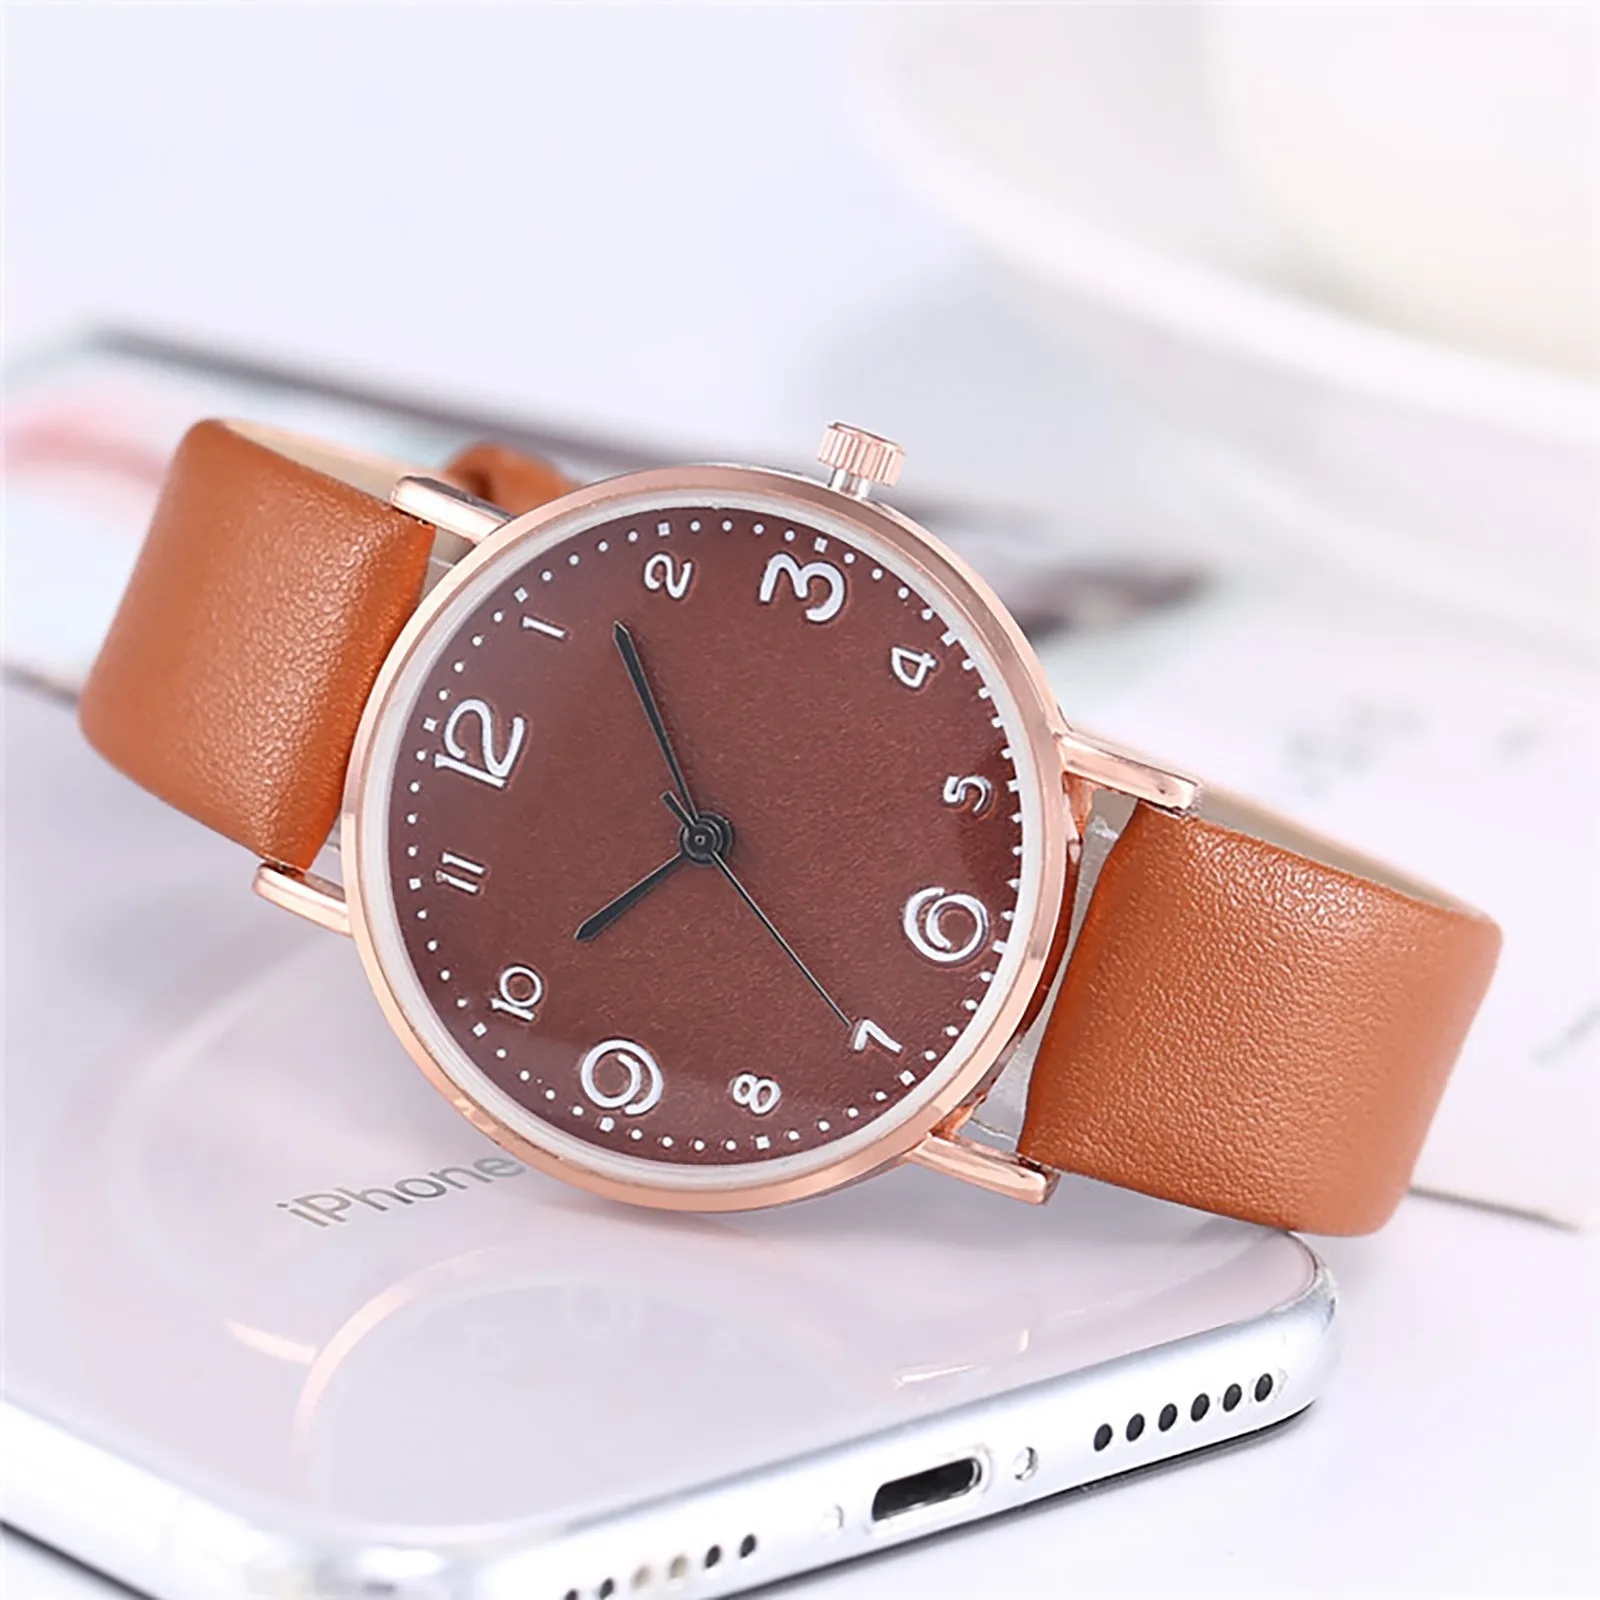 2021 New LED Simple Fashion Design Luxury Quartz Wrist Watches Leather Band Stainless Steel Dial Casual Bracele Watch Girl GIft